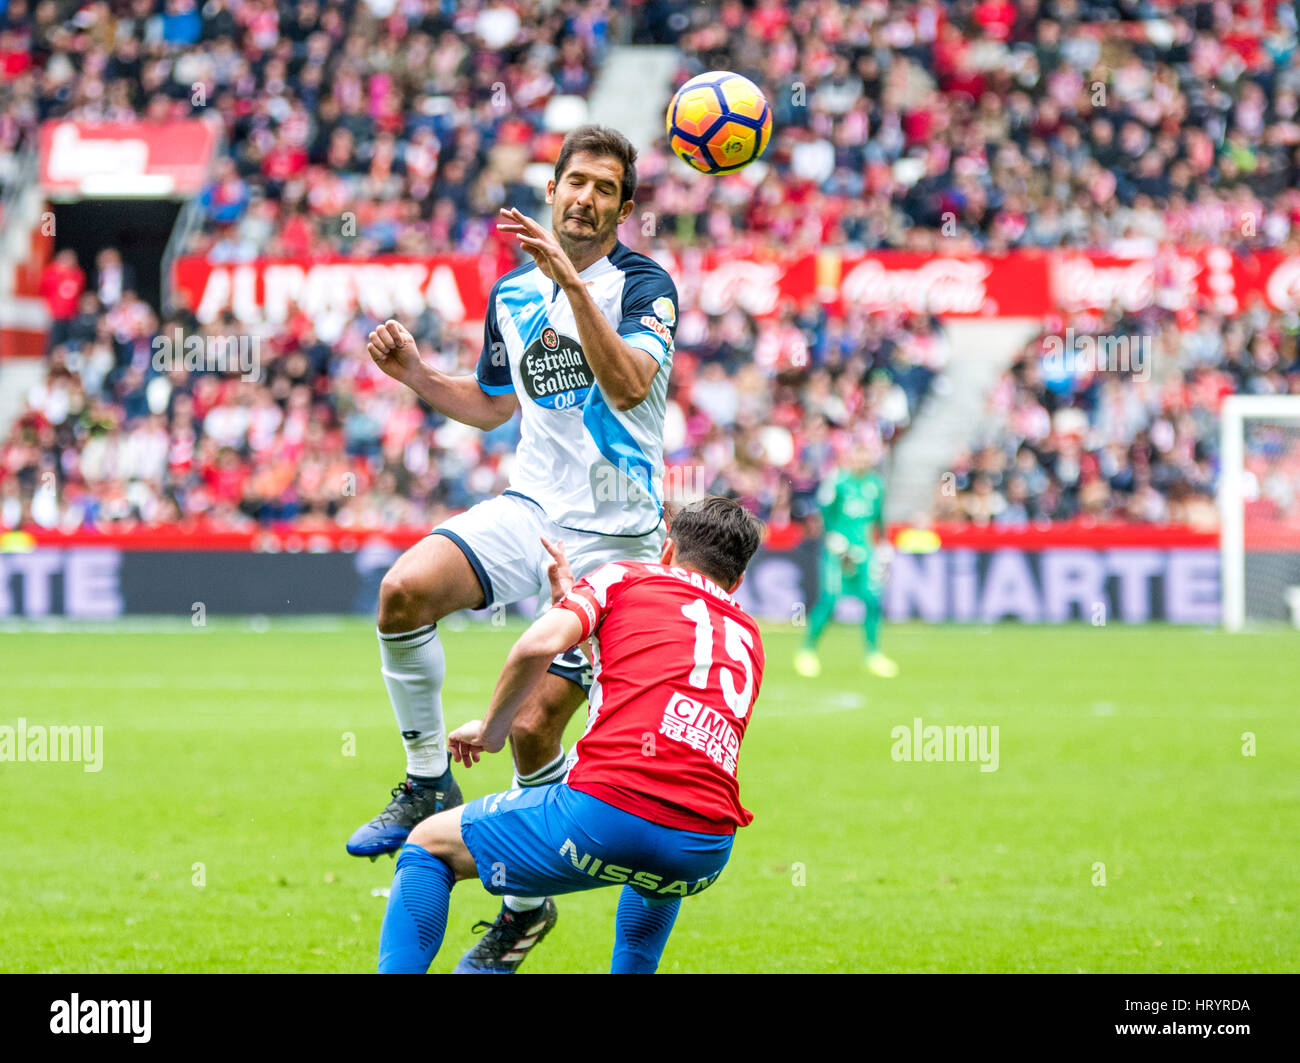 Gijon, Spain. 5th March, 2017. Celso Borges (Mildfierder, Deportivo La Coruña) in action covered by Roberto Canella (Defender, Sporting Gijon) during the football match of twenty seventh round of Season 2016/2017 of Spanish league ‘La Liga’ between Real Sporting de Gijon and RC Deportivo La Coruña at Molinon Stadium on March 5, 2016 in Gijon, Spain. ©David Gato/Alamy Live News Stock Photo